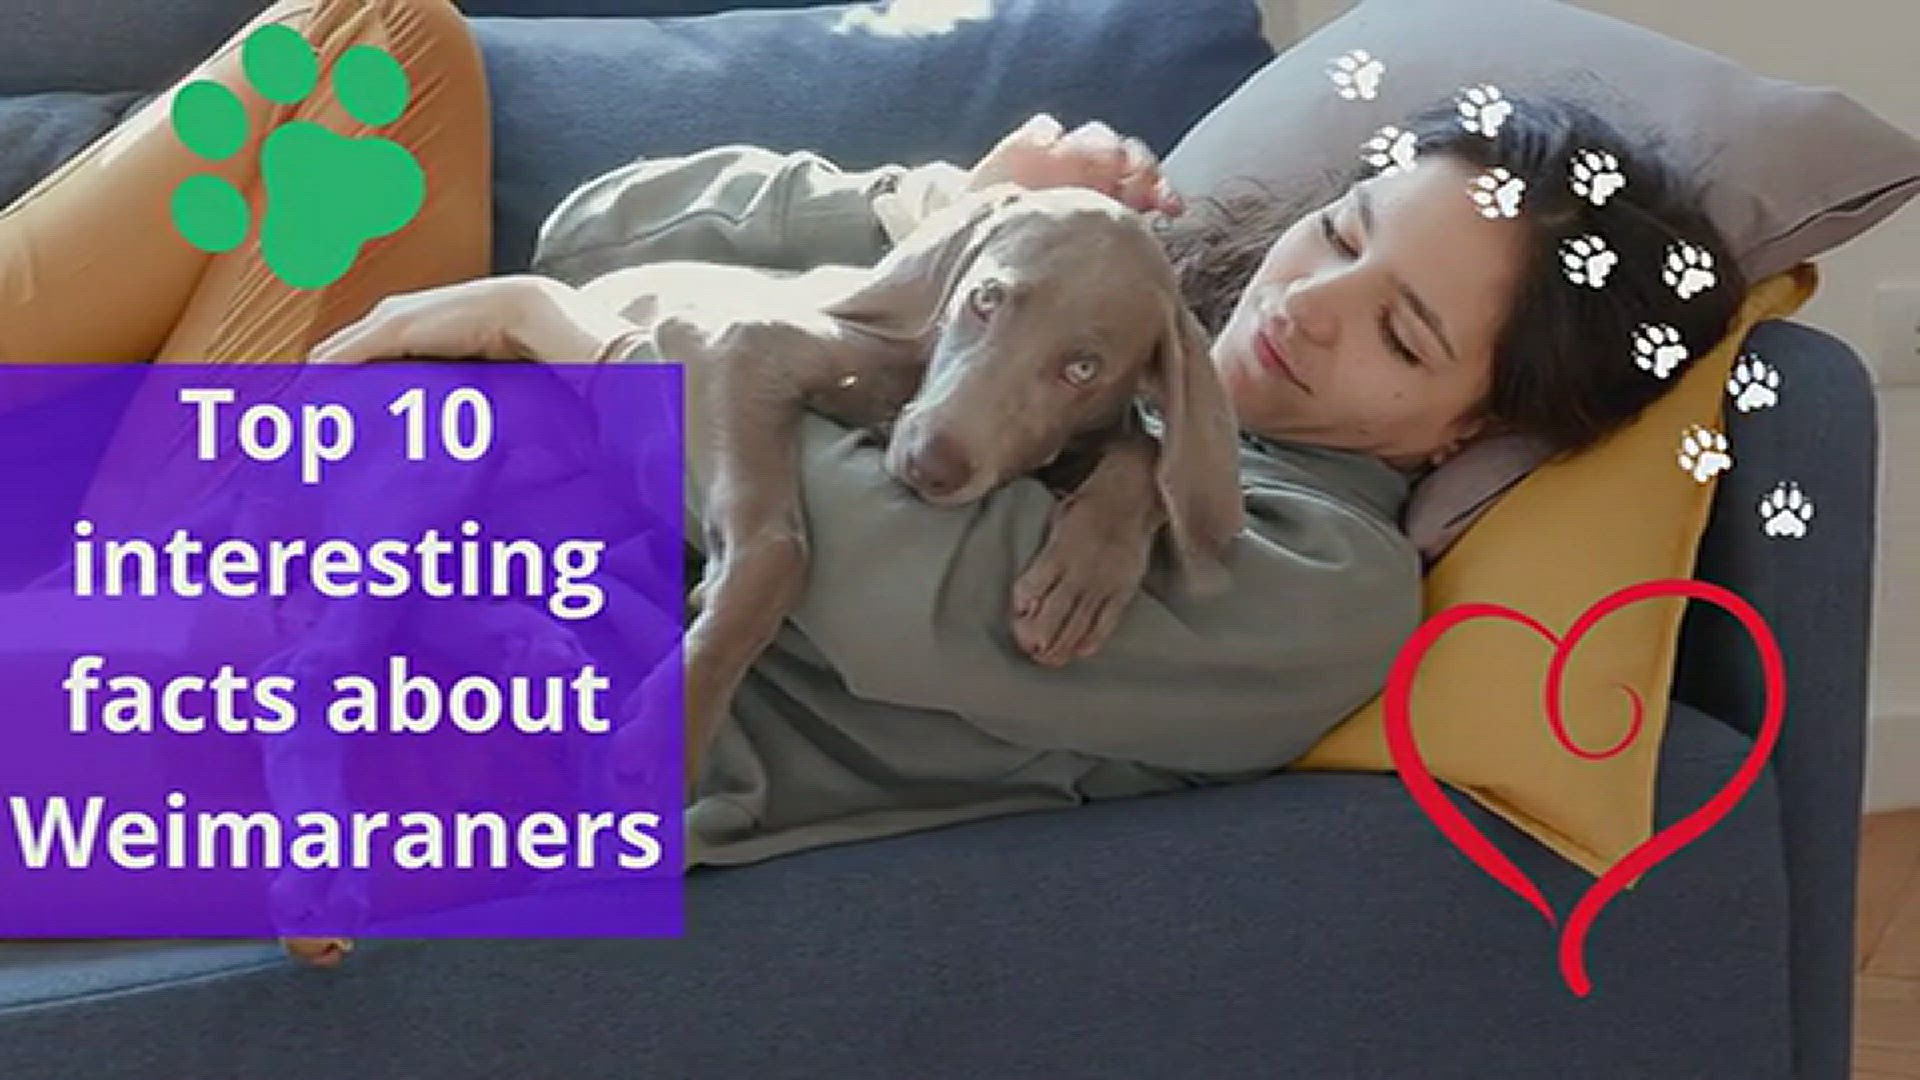 'Video thumbnail for 10 interesting facts about Weimaraners'